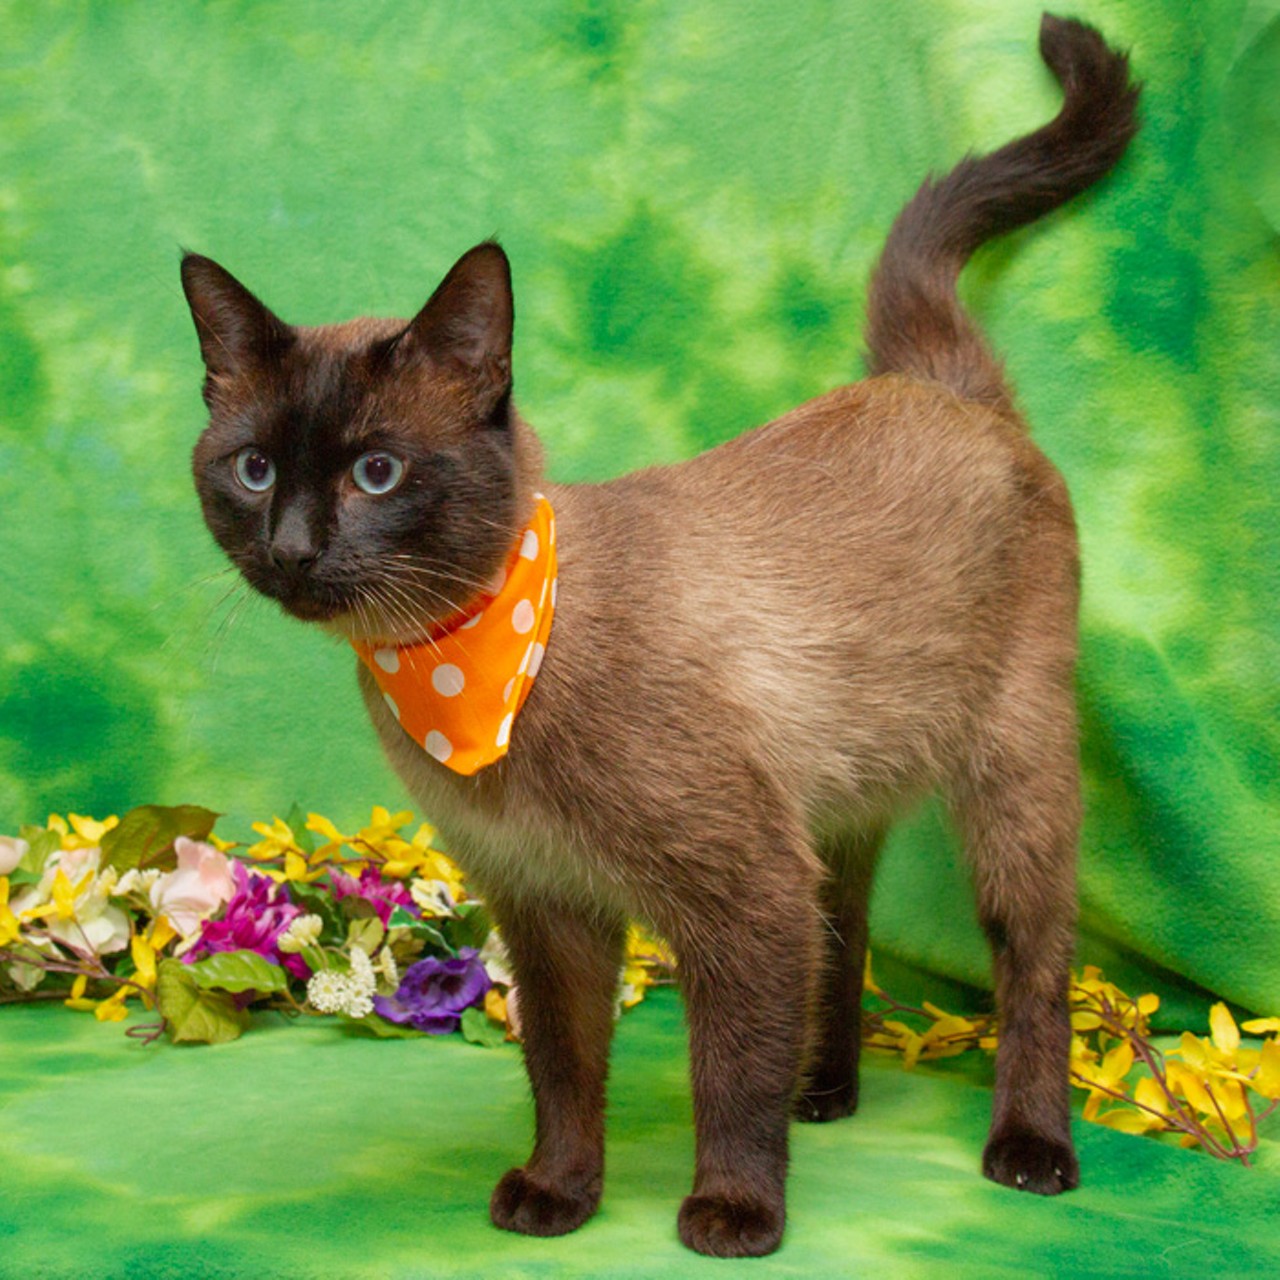 NAME: P.J. 
GENDER: Male
BREED: Siamese
AGE: 2 years, 4 months
WEIGHT: 10 pounds
SPECIAL CONSIDERATIONS: P.J. is healing from a fractured spine, but he is expected to make a full recovery.
REASON I CAME TO MHS: Homeless in Garden City
LOCATION: Berman Center for Animal Care in Westland
ID NUMBER: 865698